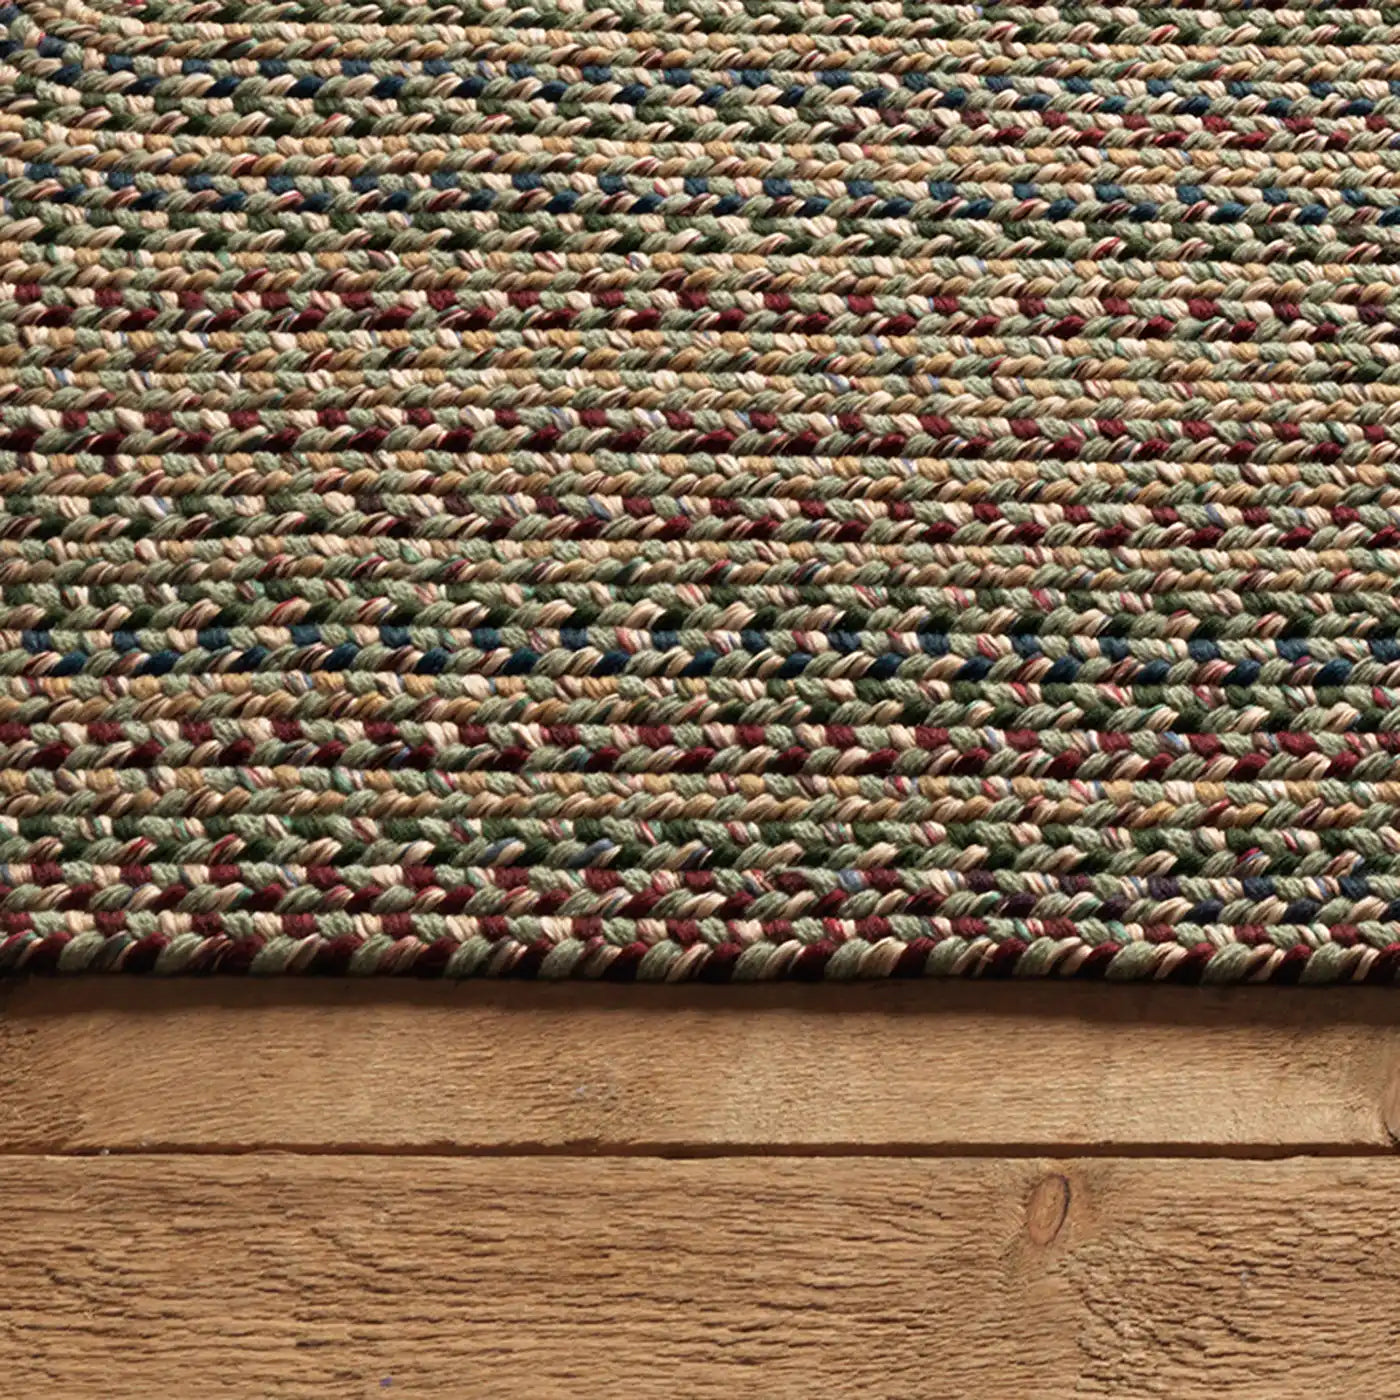 Colonial Mills Worley Blue Handcraft Braided Runner Rug in Braided & Farmhouse/Rustic style.